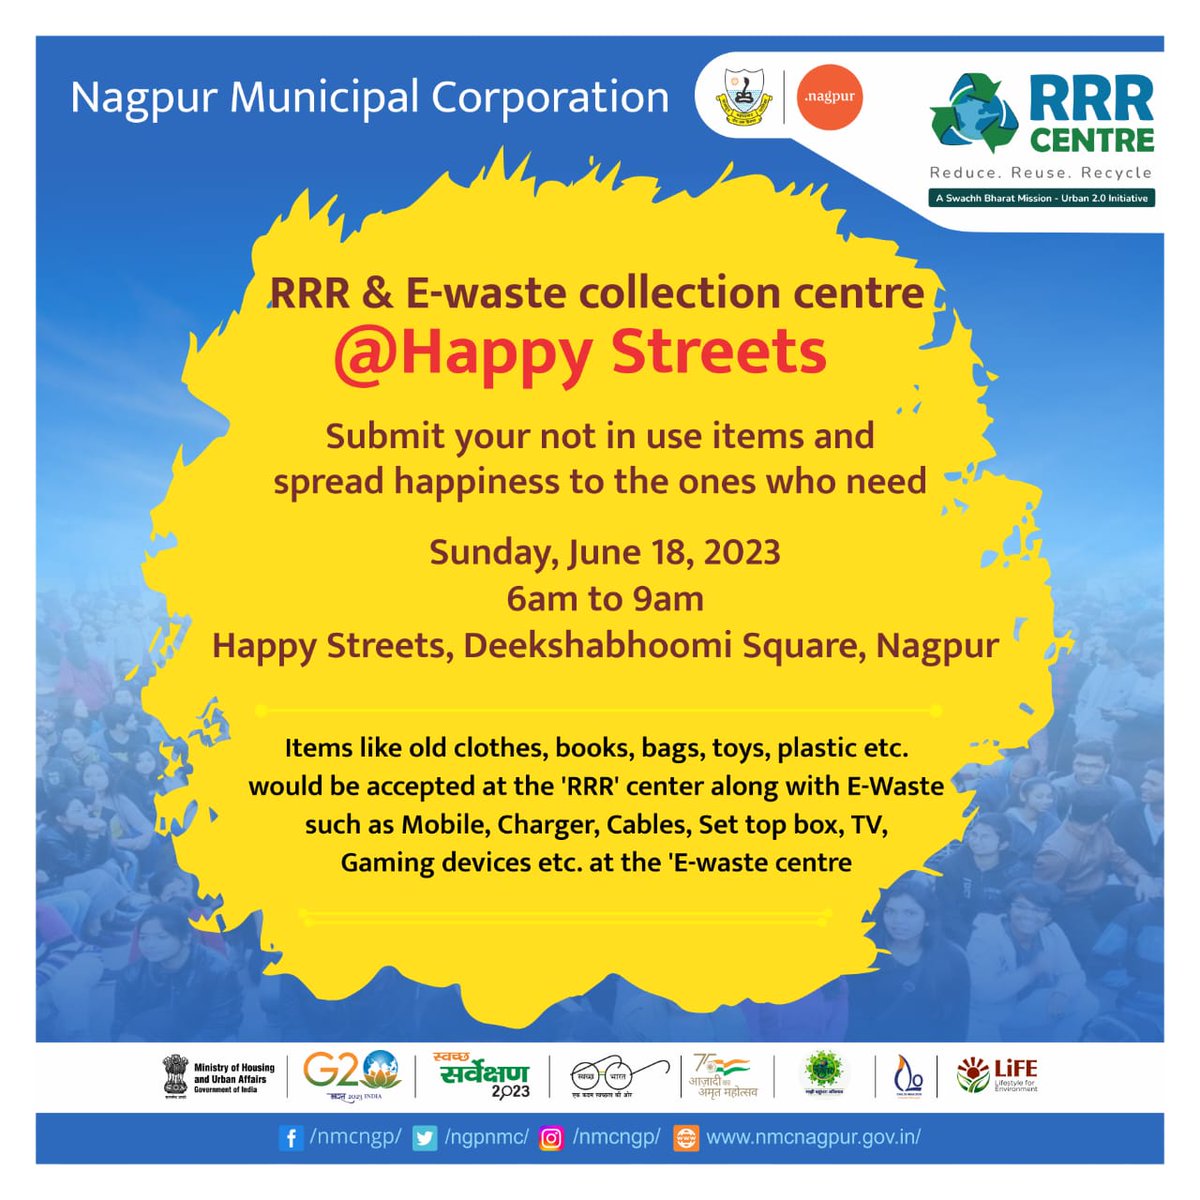 #RRR & #Ewaste collection centre at #Happy_Streets
Submit your not in use items and spread happiness to the ones who need.

#reuse #Recycle #reduce #MeriLiFE #RRR4LiFE #ChooseLiFE #IndiaVsGarbage #MeraSwachhShehar #nmc #nagpur #nagpurcity #माझीवसुंधरा